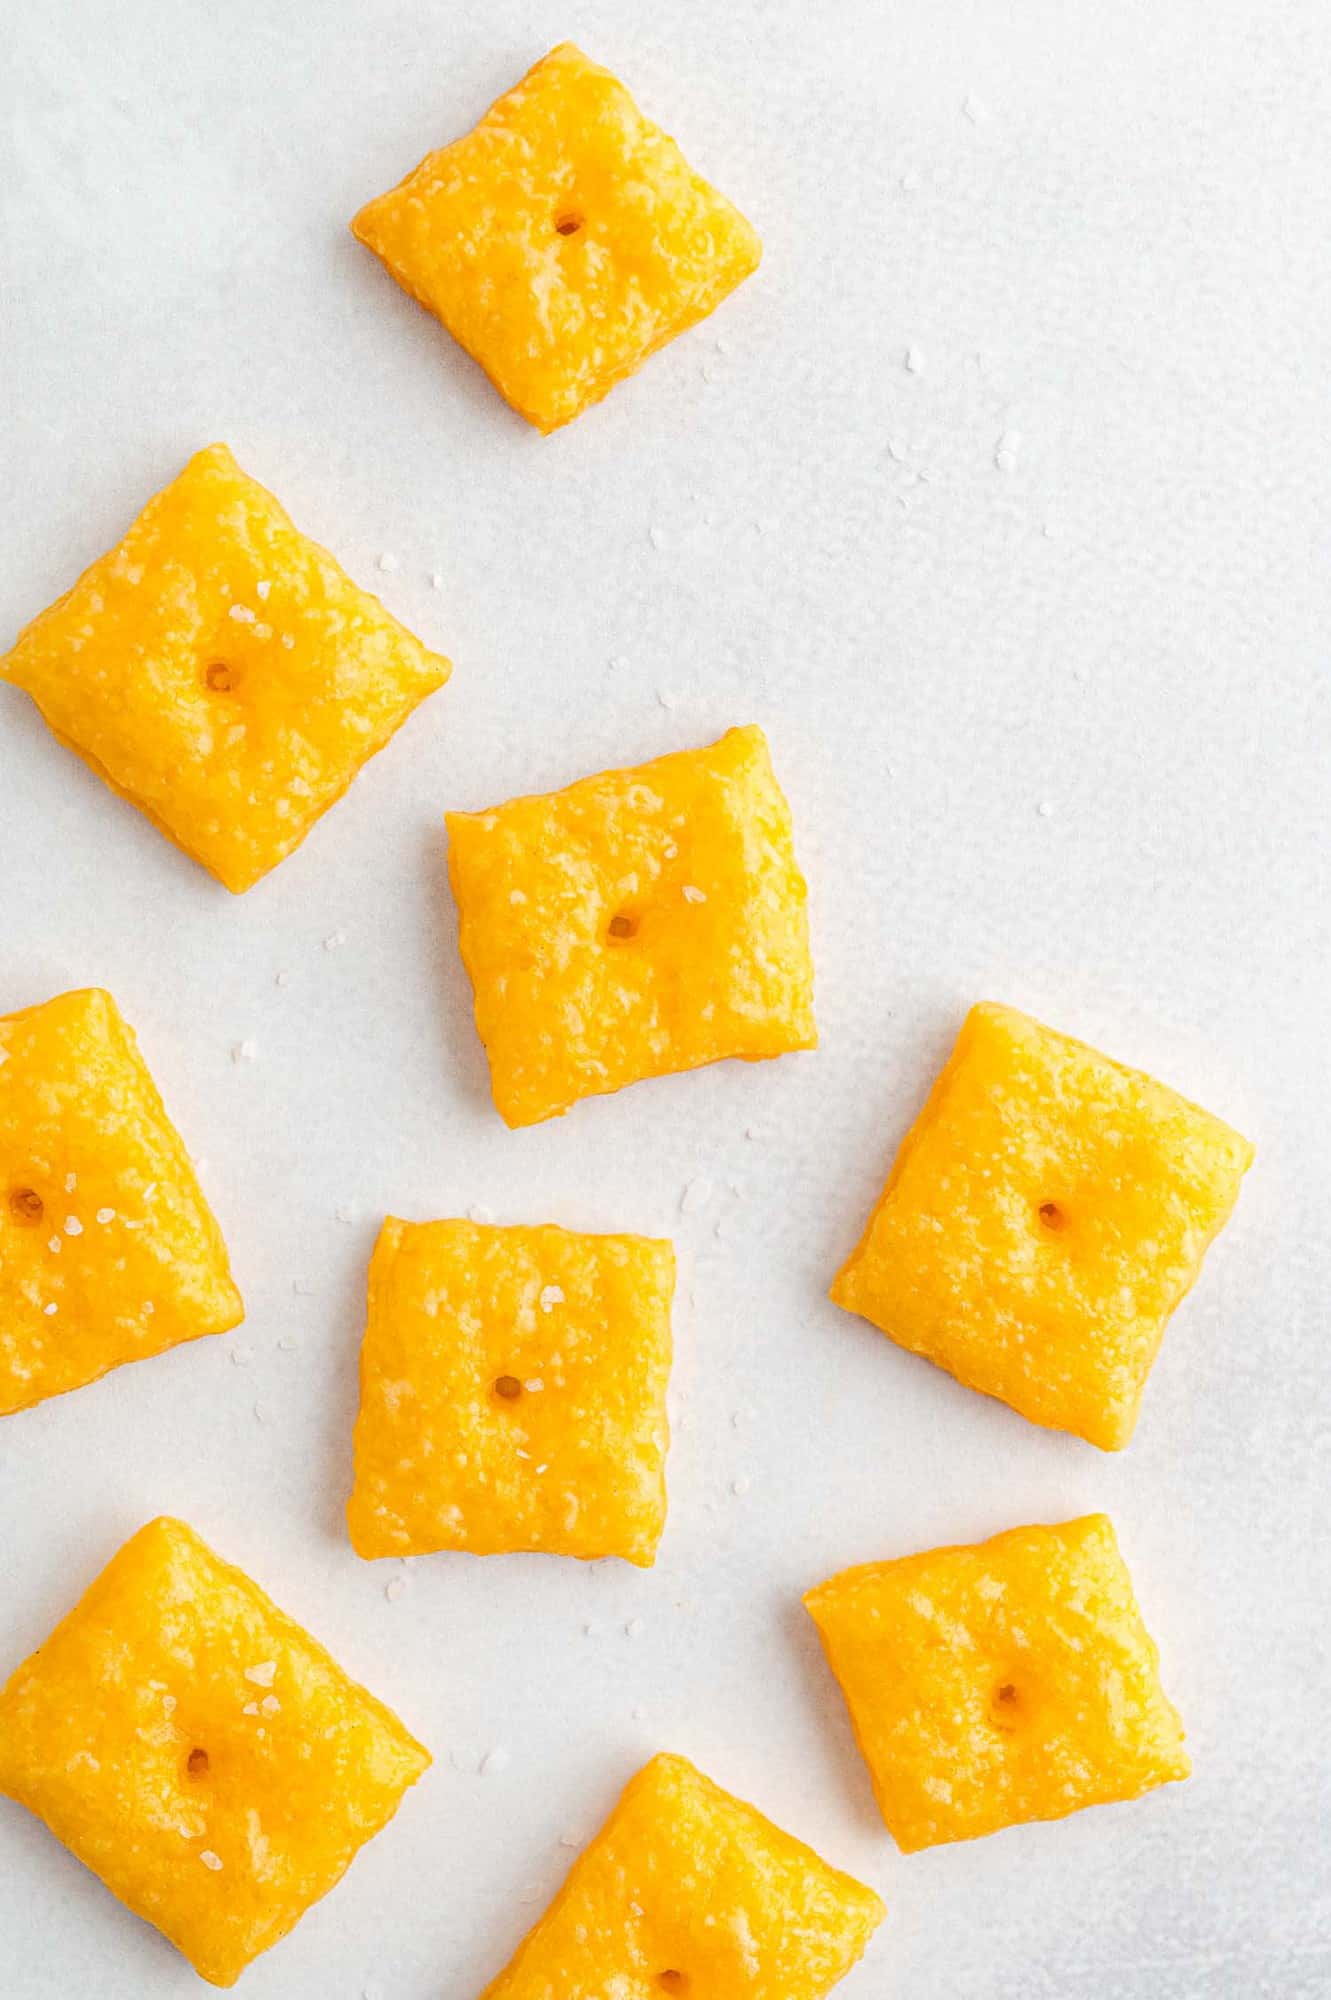 Cheez-its laid out on a white surface.